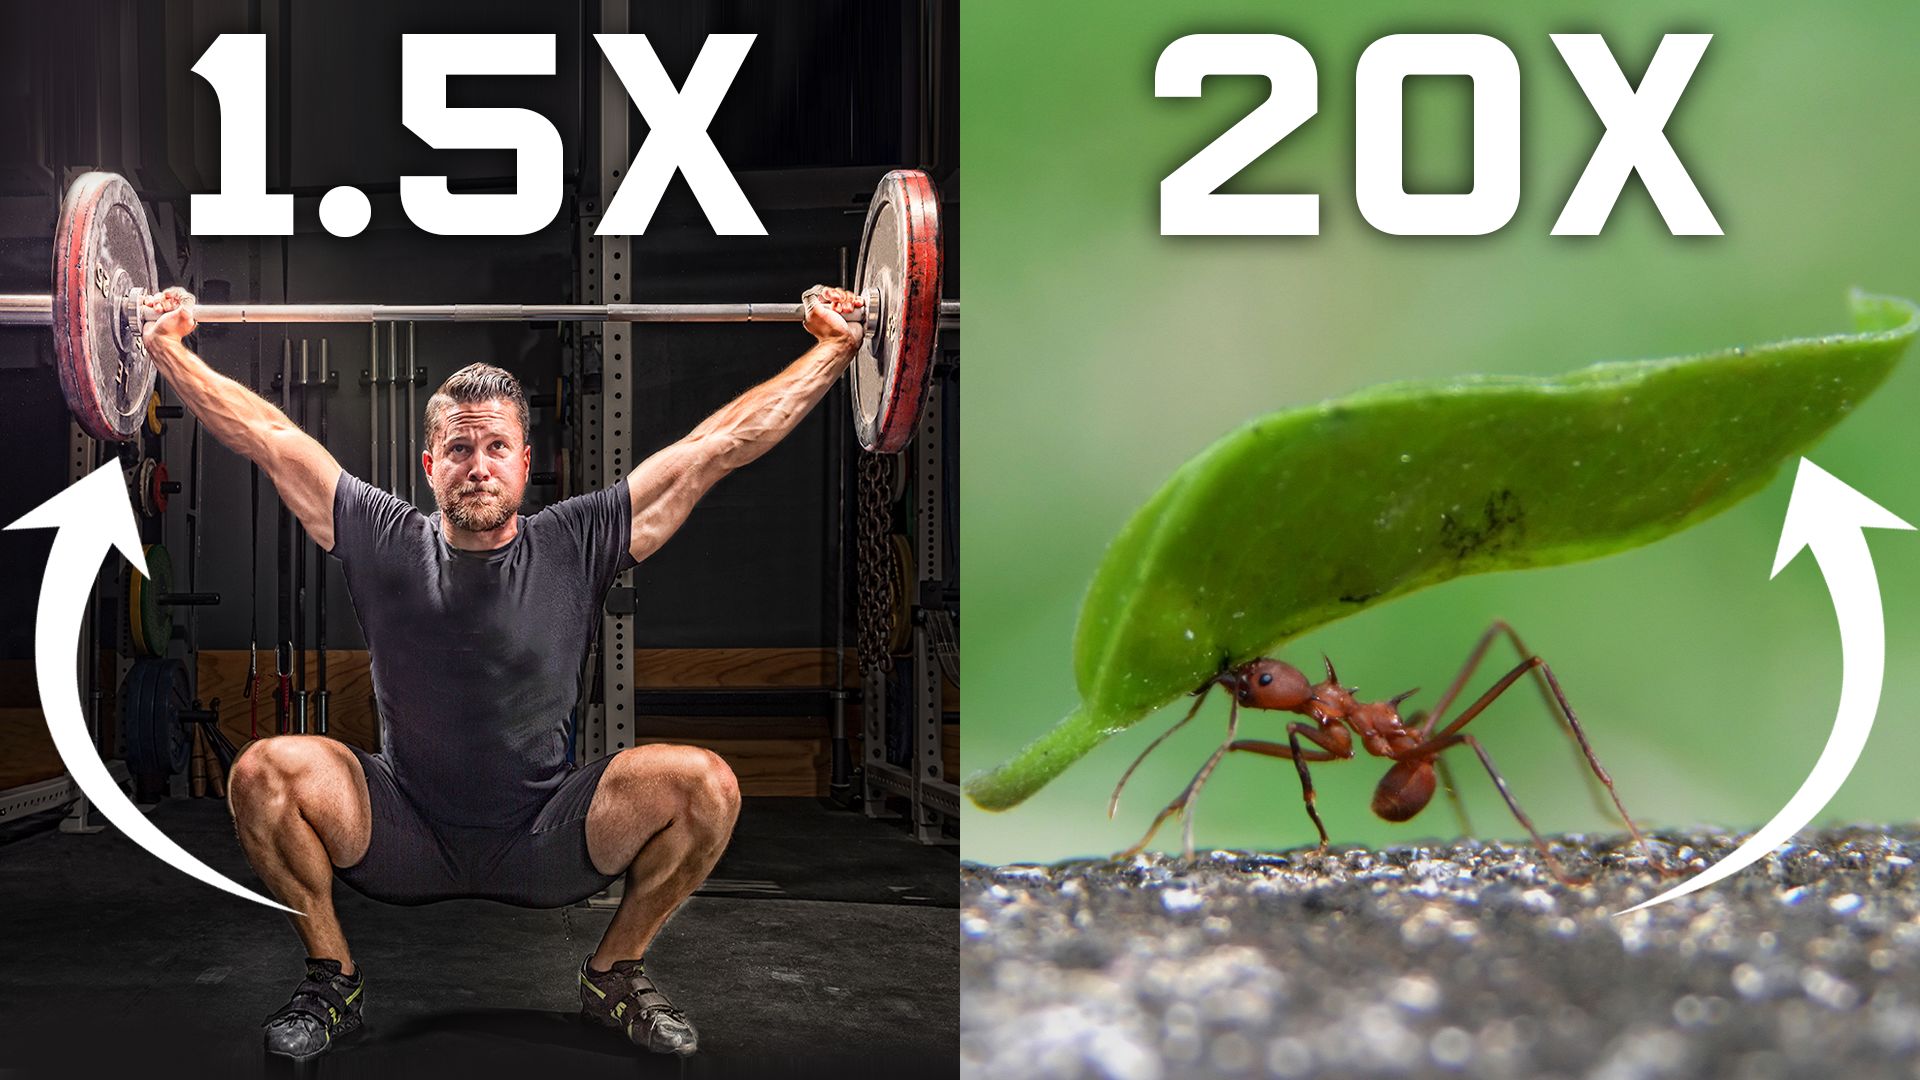 How Much Ant Can Lift Weight